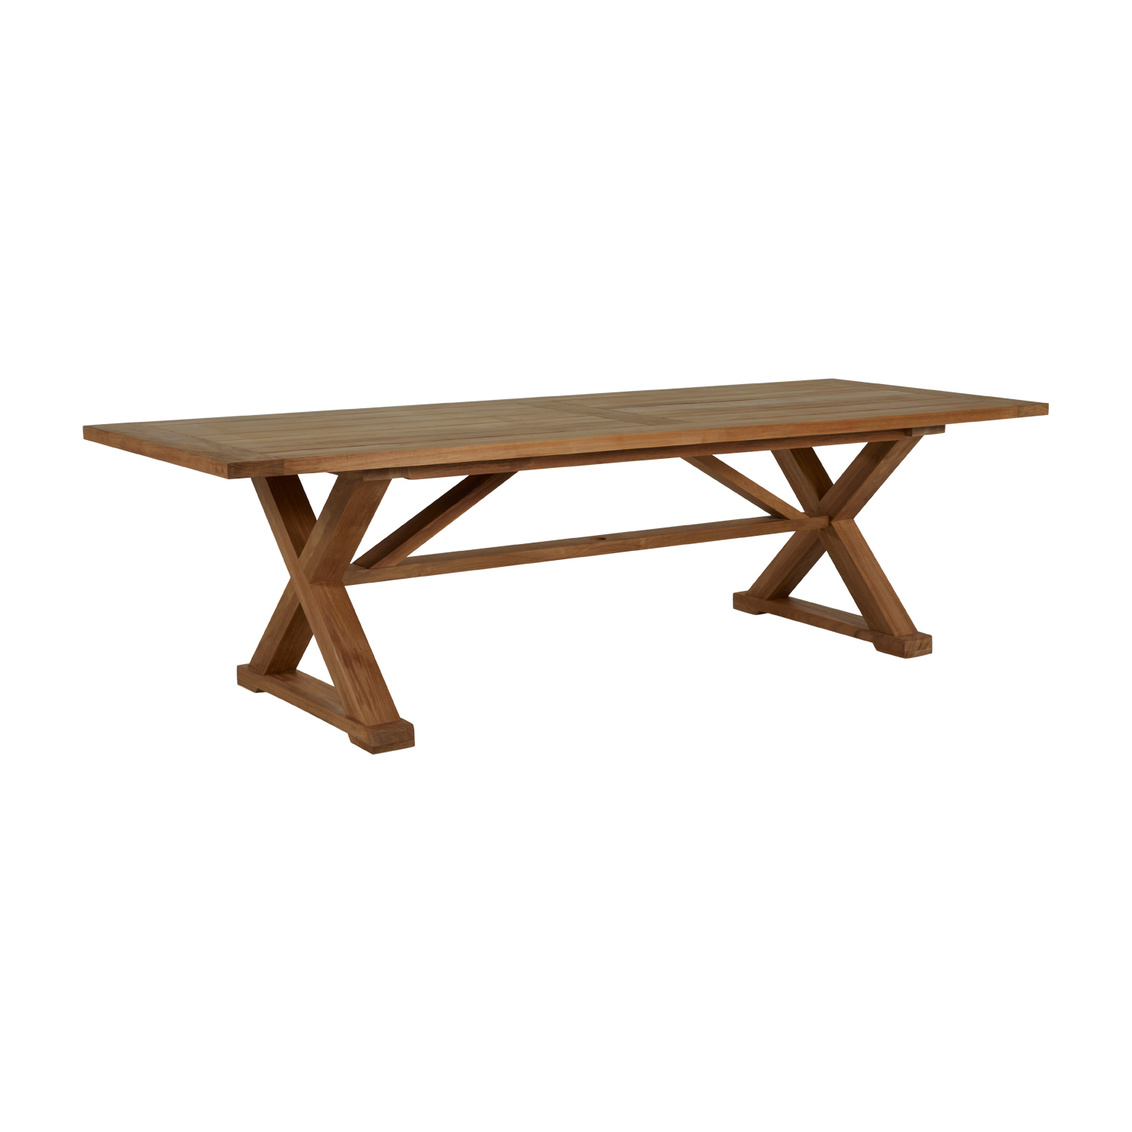 modena rectangular dining table and base in natural teak (w/ hole) product image